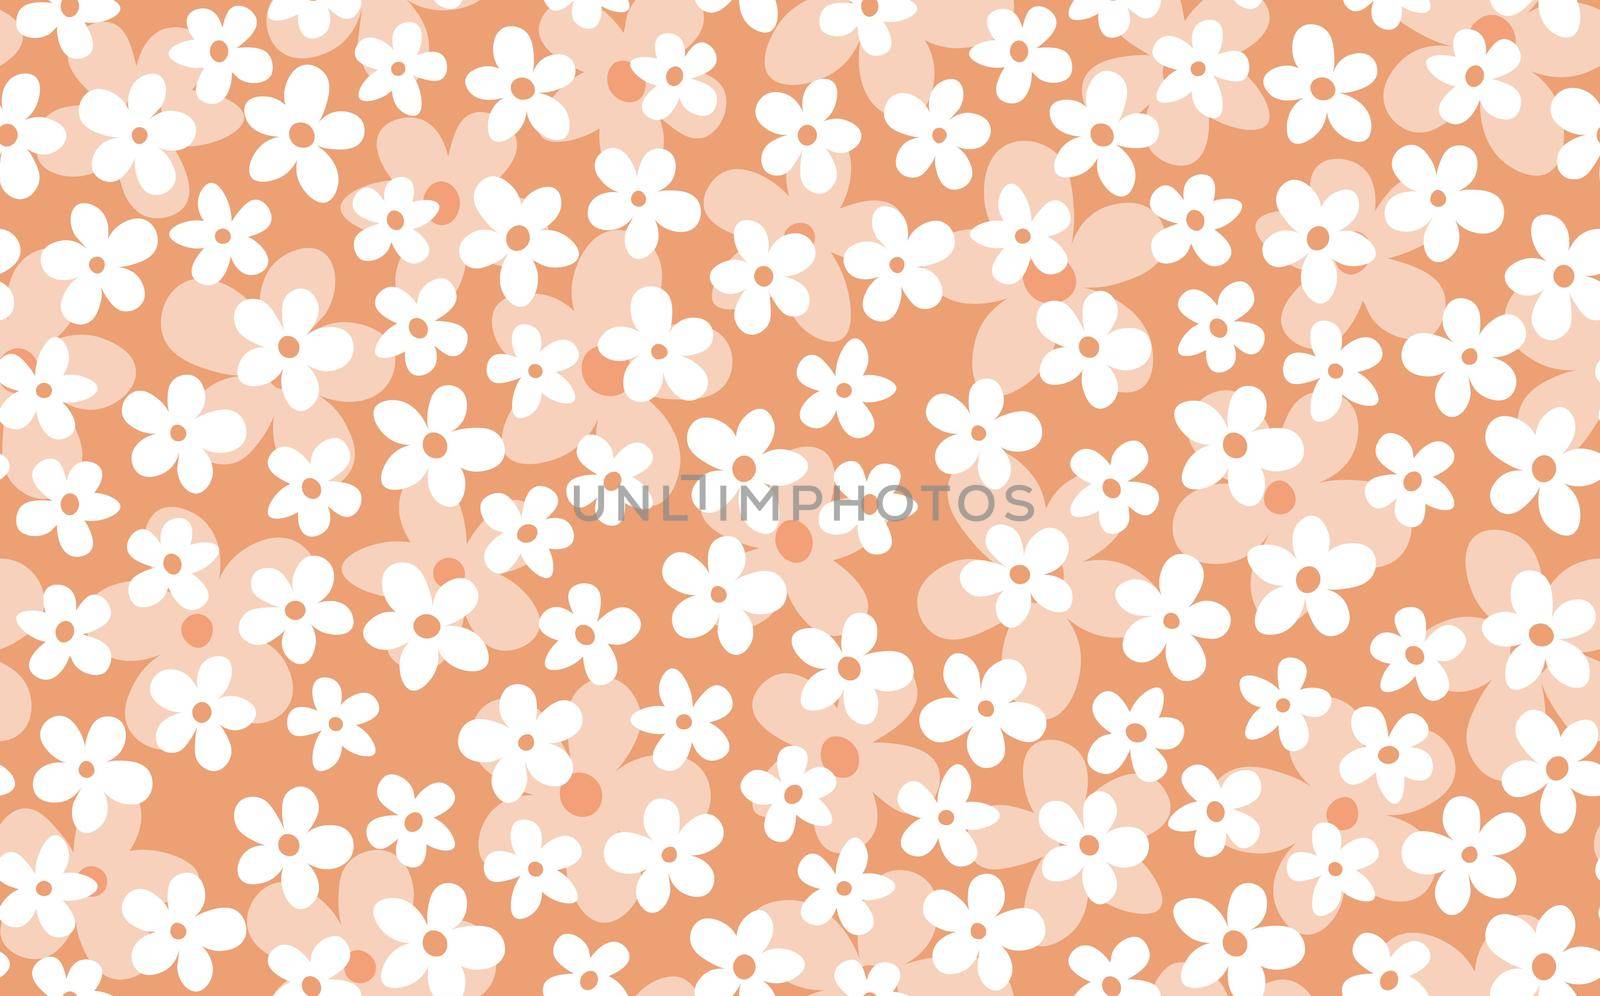 Floral seamless with hand drawn color flowers. Cute summer background. Modern floral compositions. Fashion vector stock illustration for wallpaper, posters, card, fabric, textile.